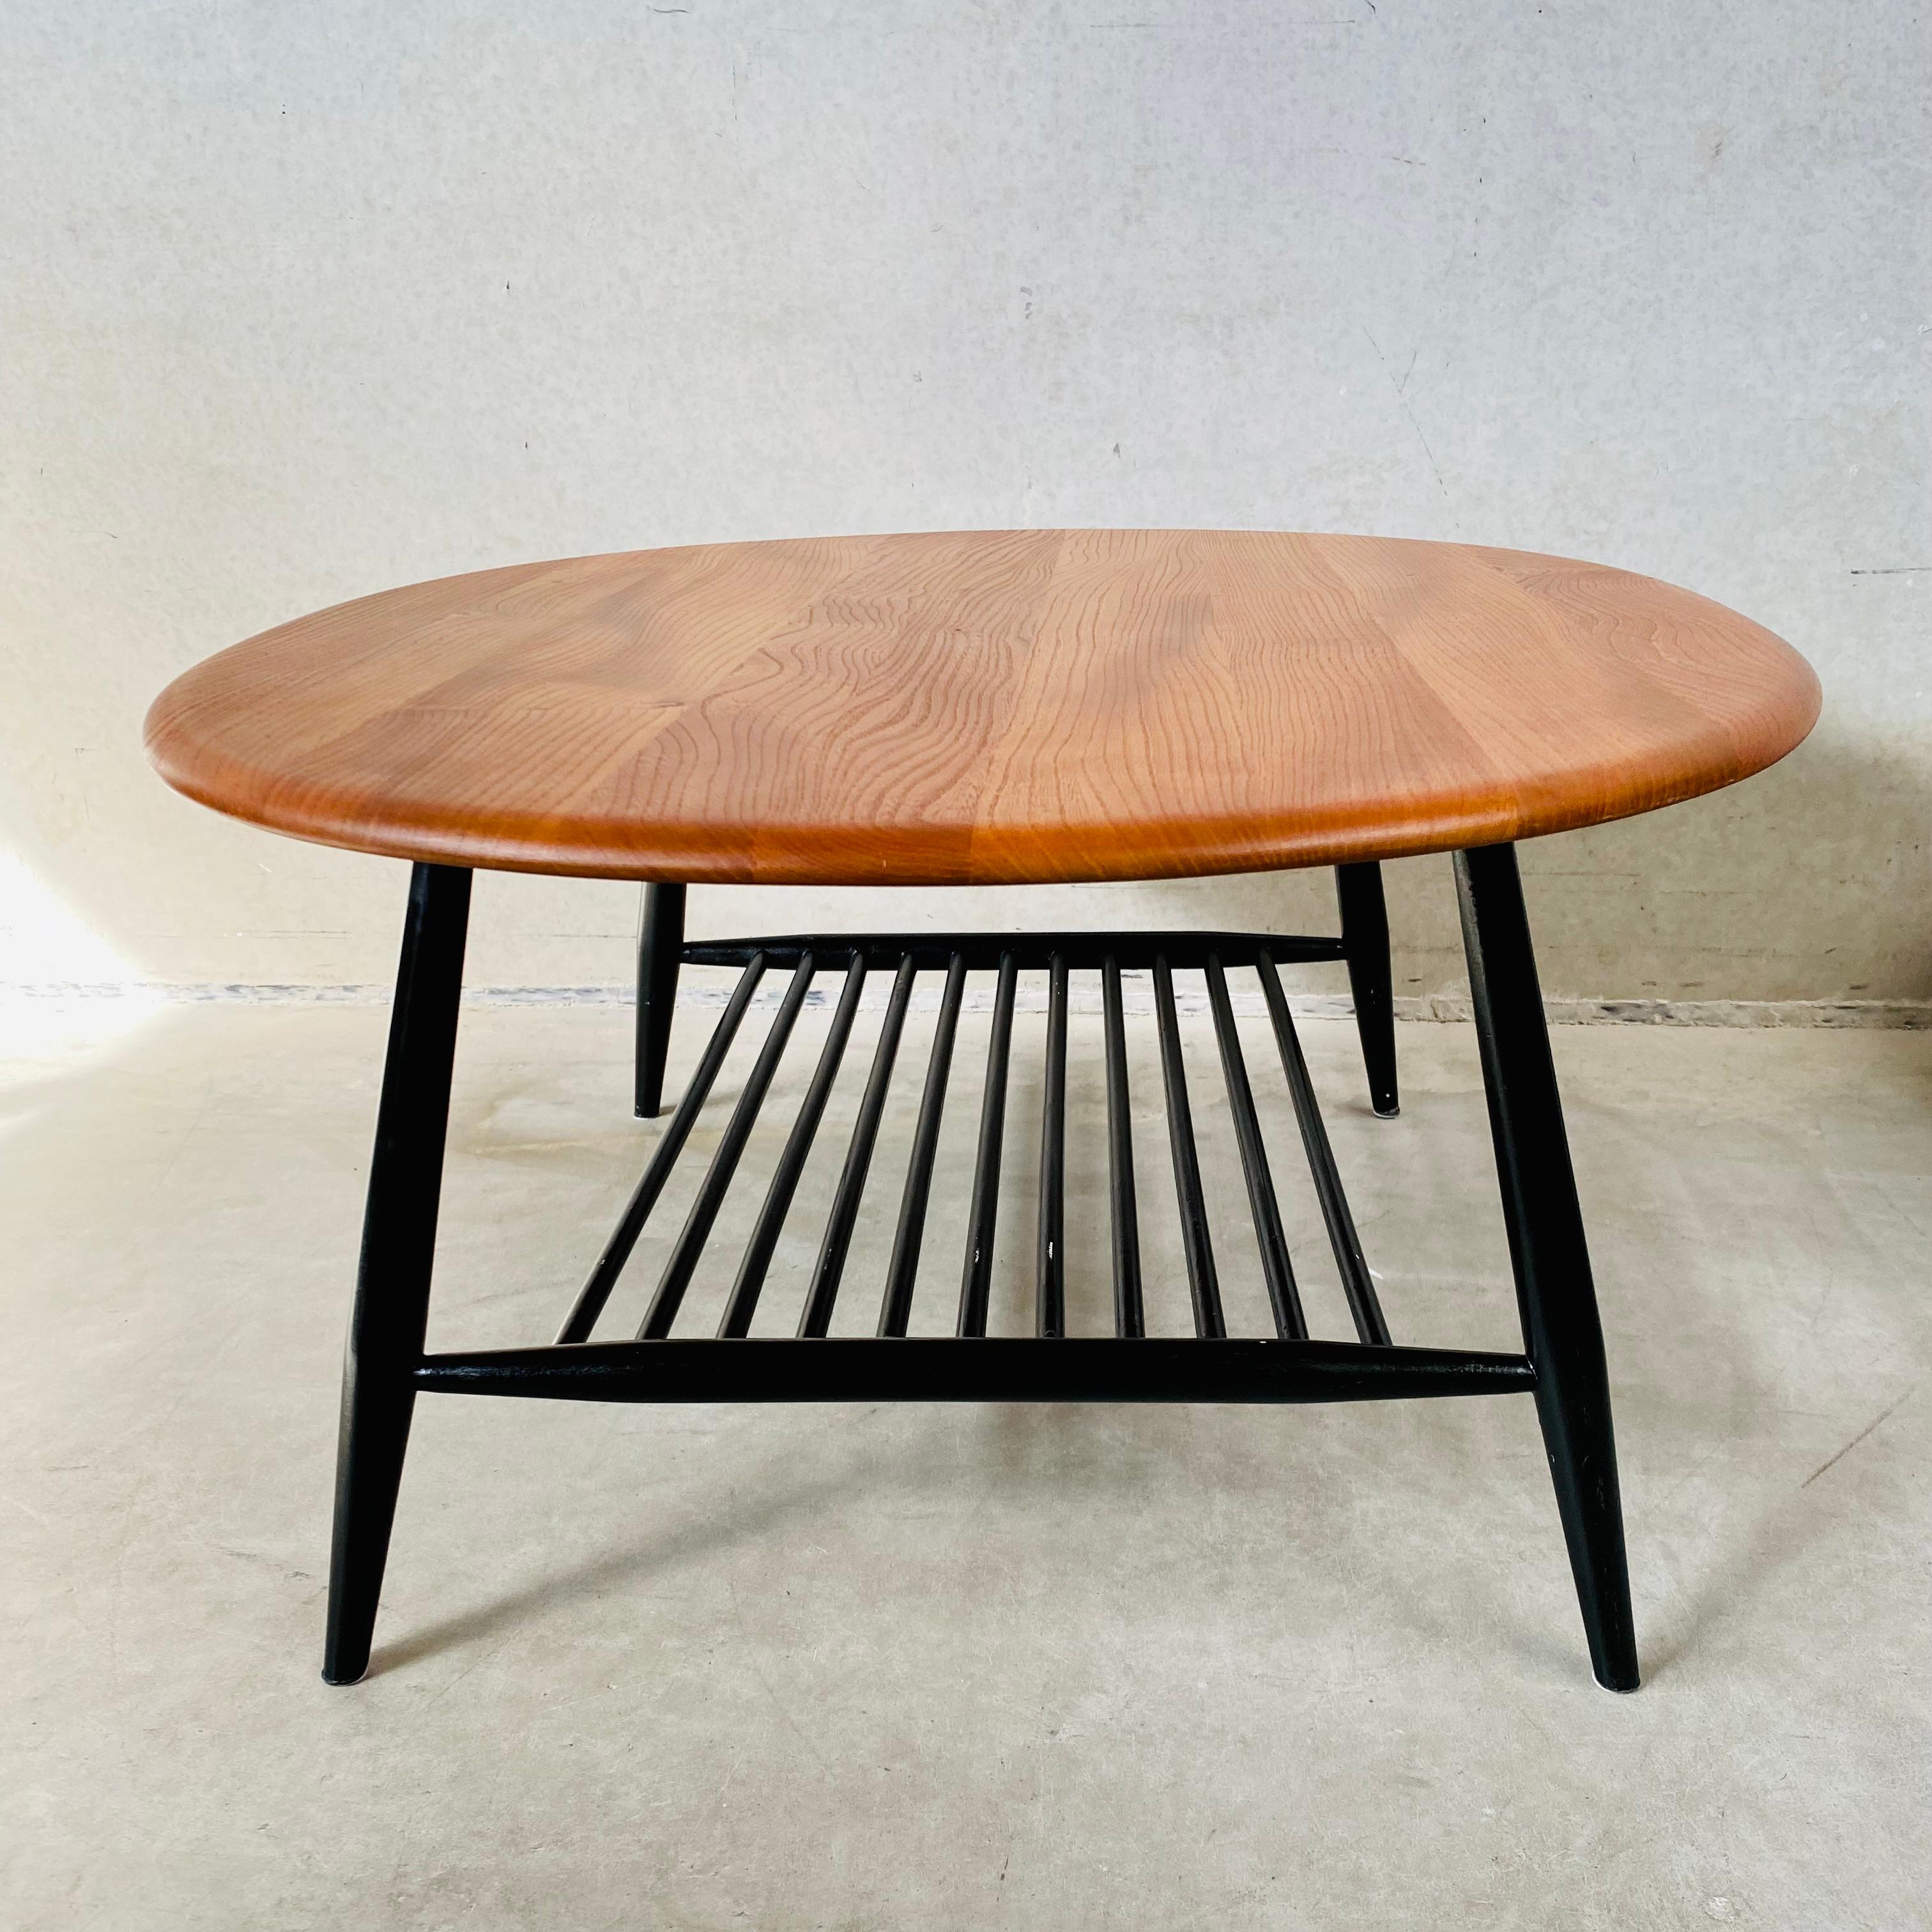 Ercol Coffee Table Vintage - 6 For Sale on 1stDibs